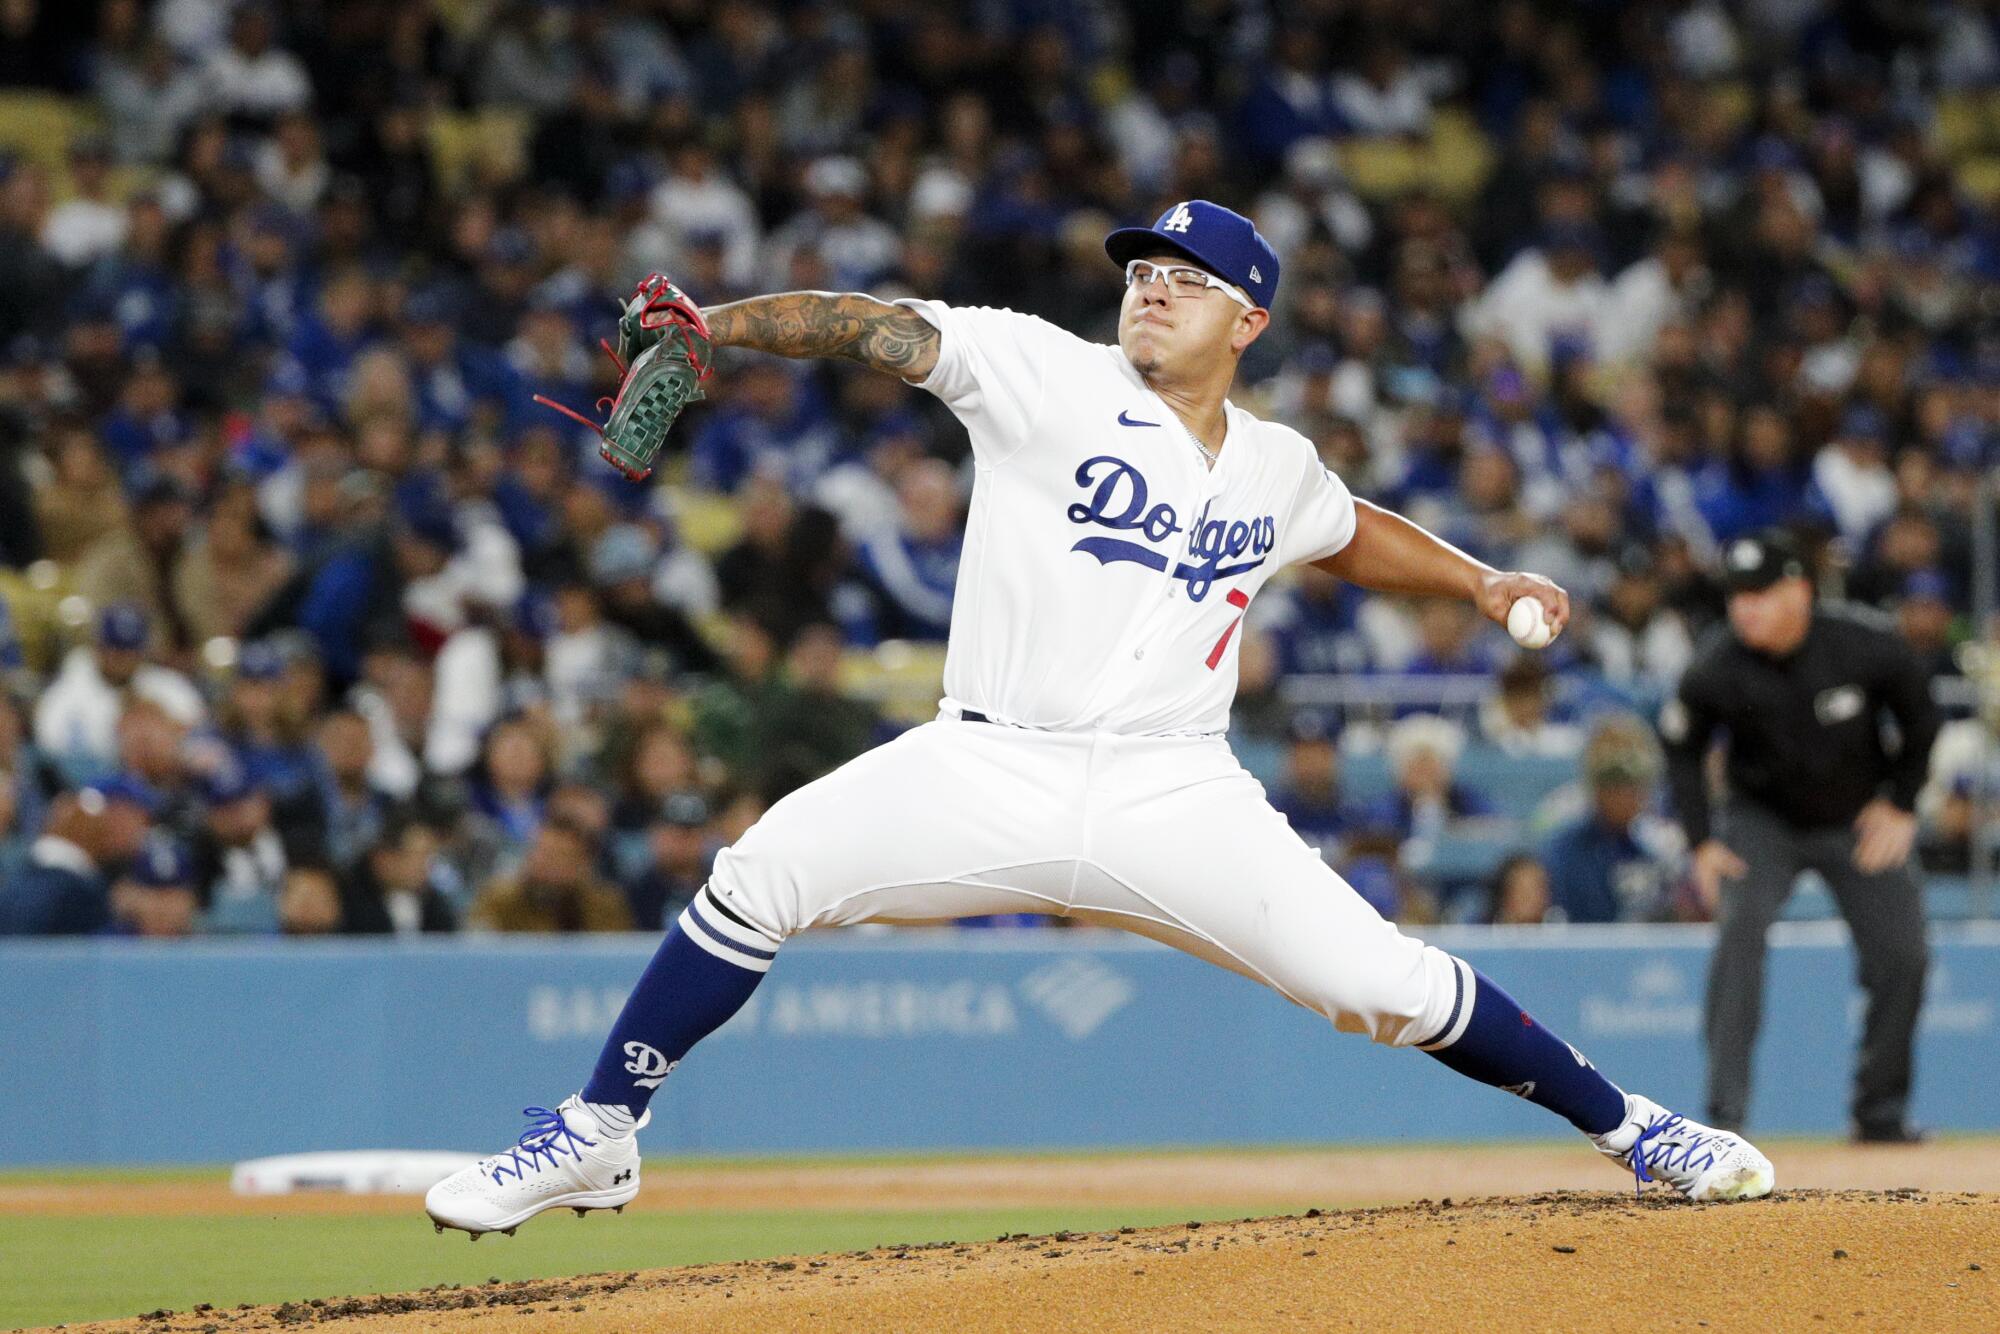 Dodgers starting pitcher Julio Urias (7) delivers a pitch.